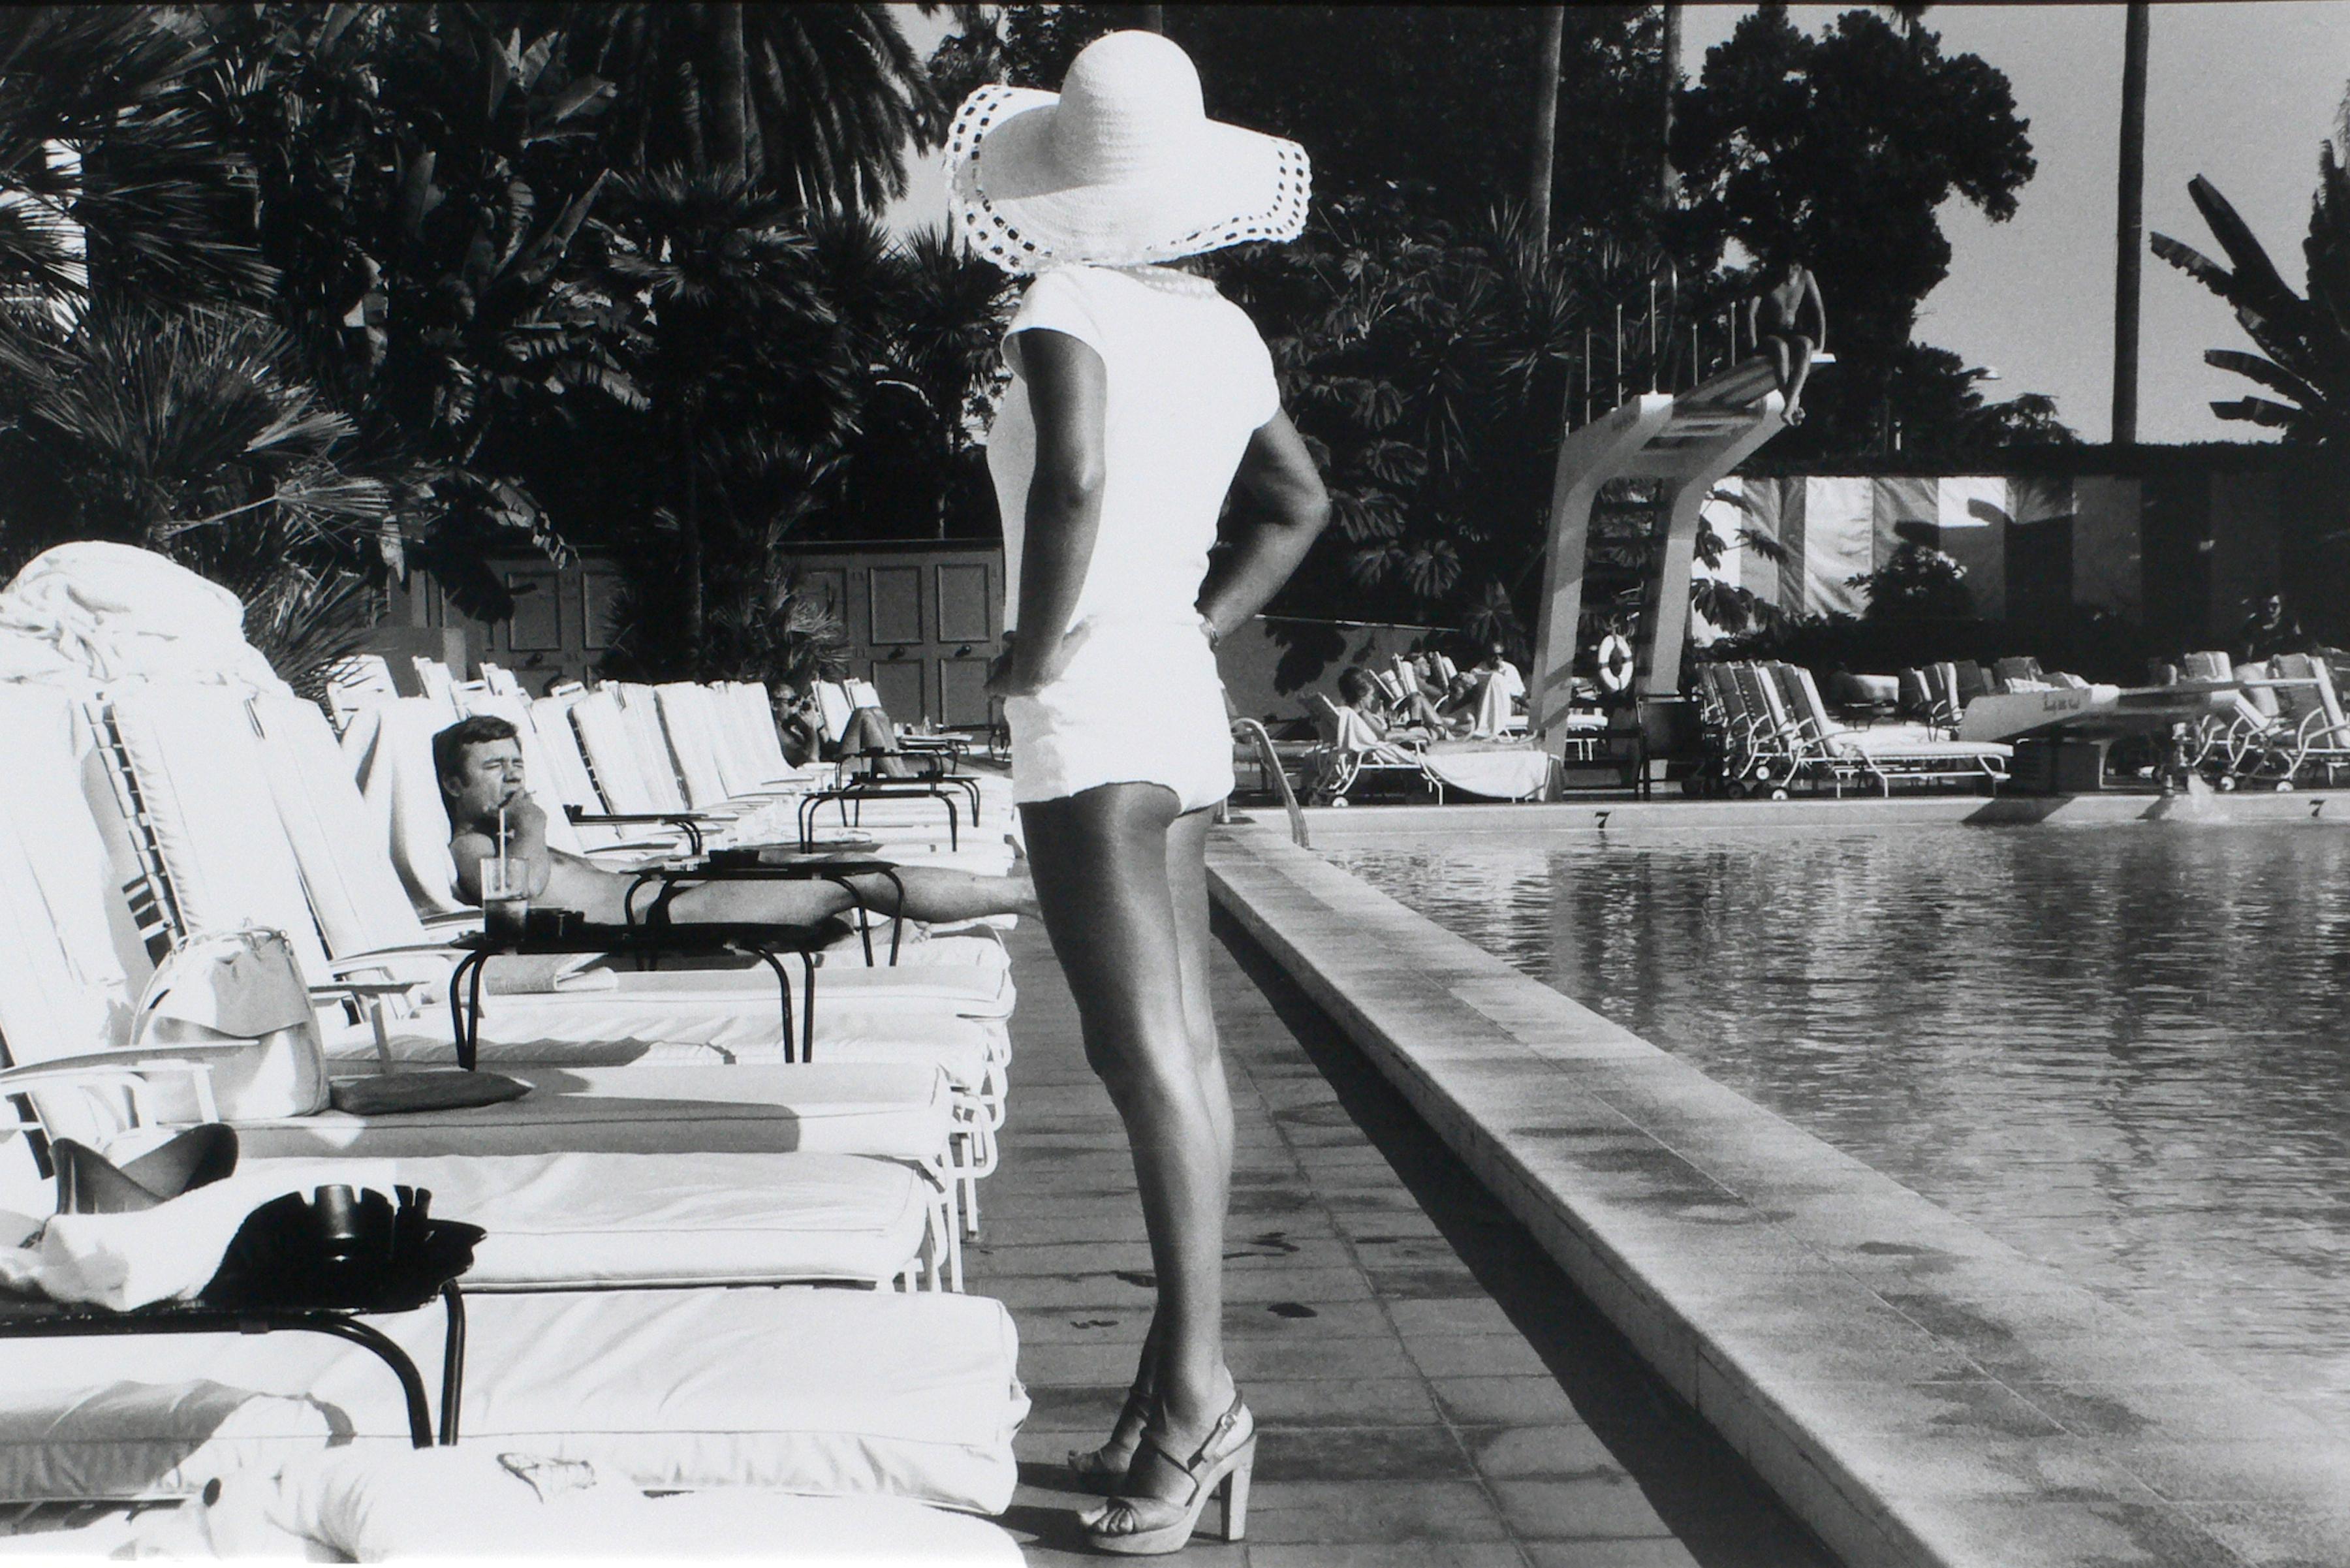 The Woman by the Pool - Beverly Hills Hotel, Kalifornien U.S.A - Anthony Friedkin